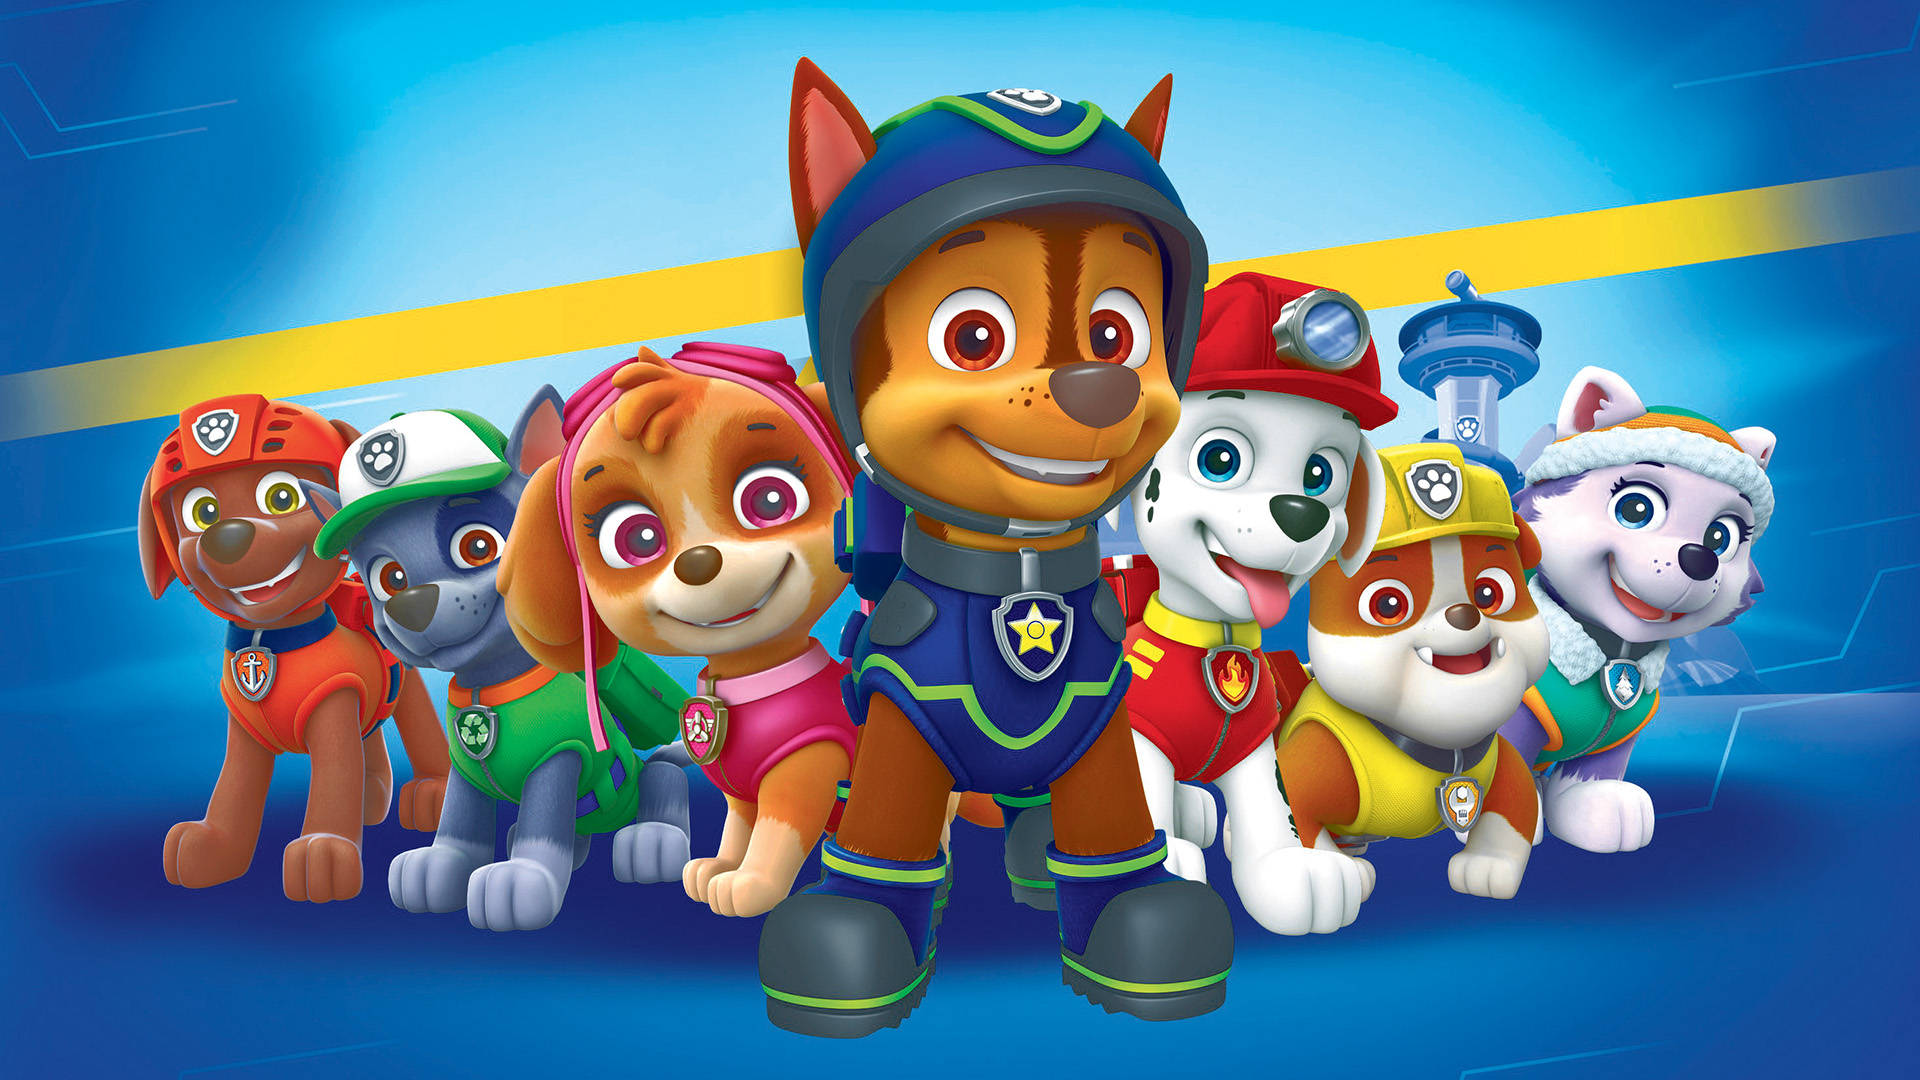 Paw Patrol The Movie Characters In Uniforms Wallpaper